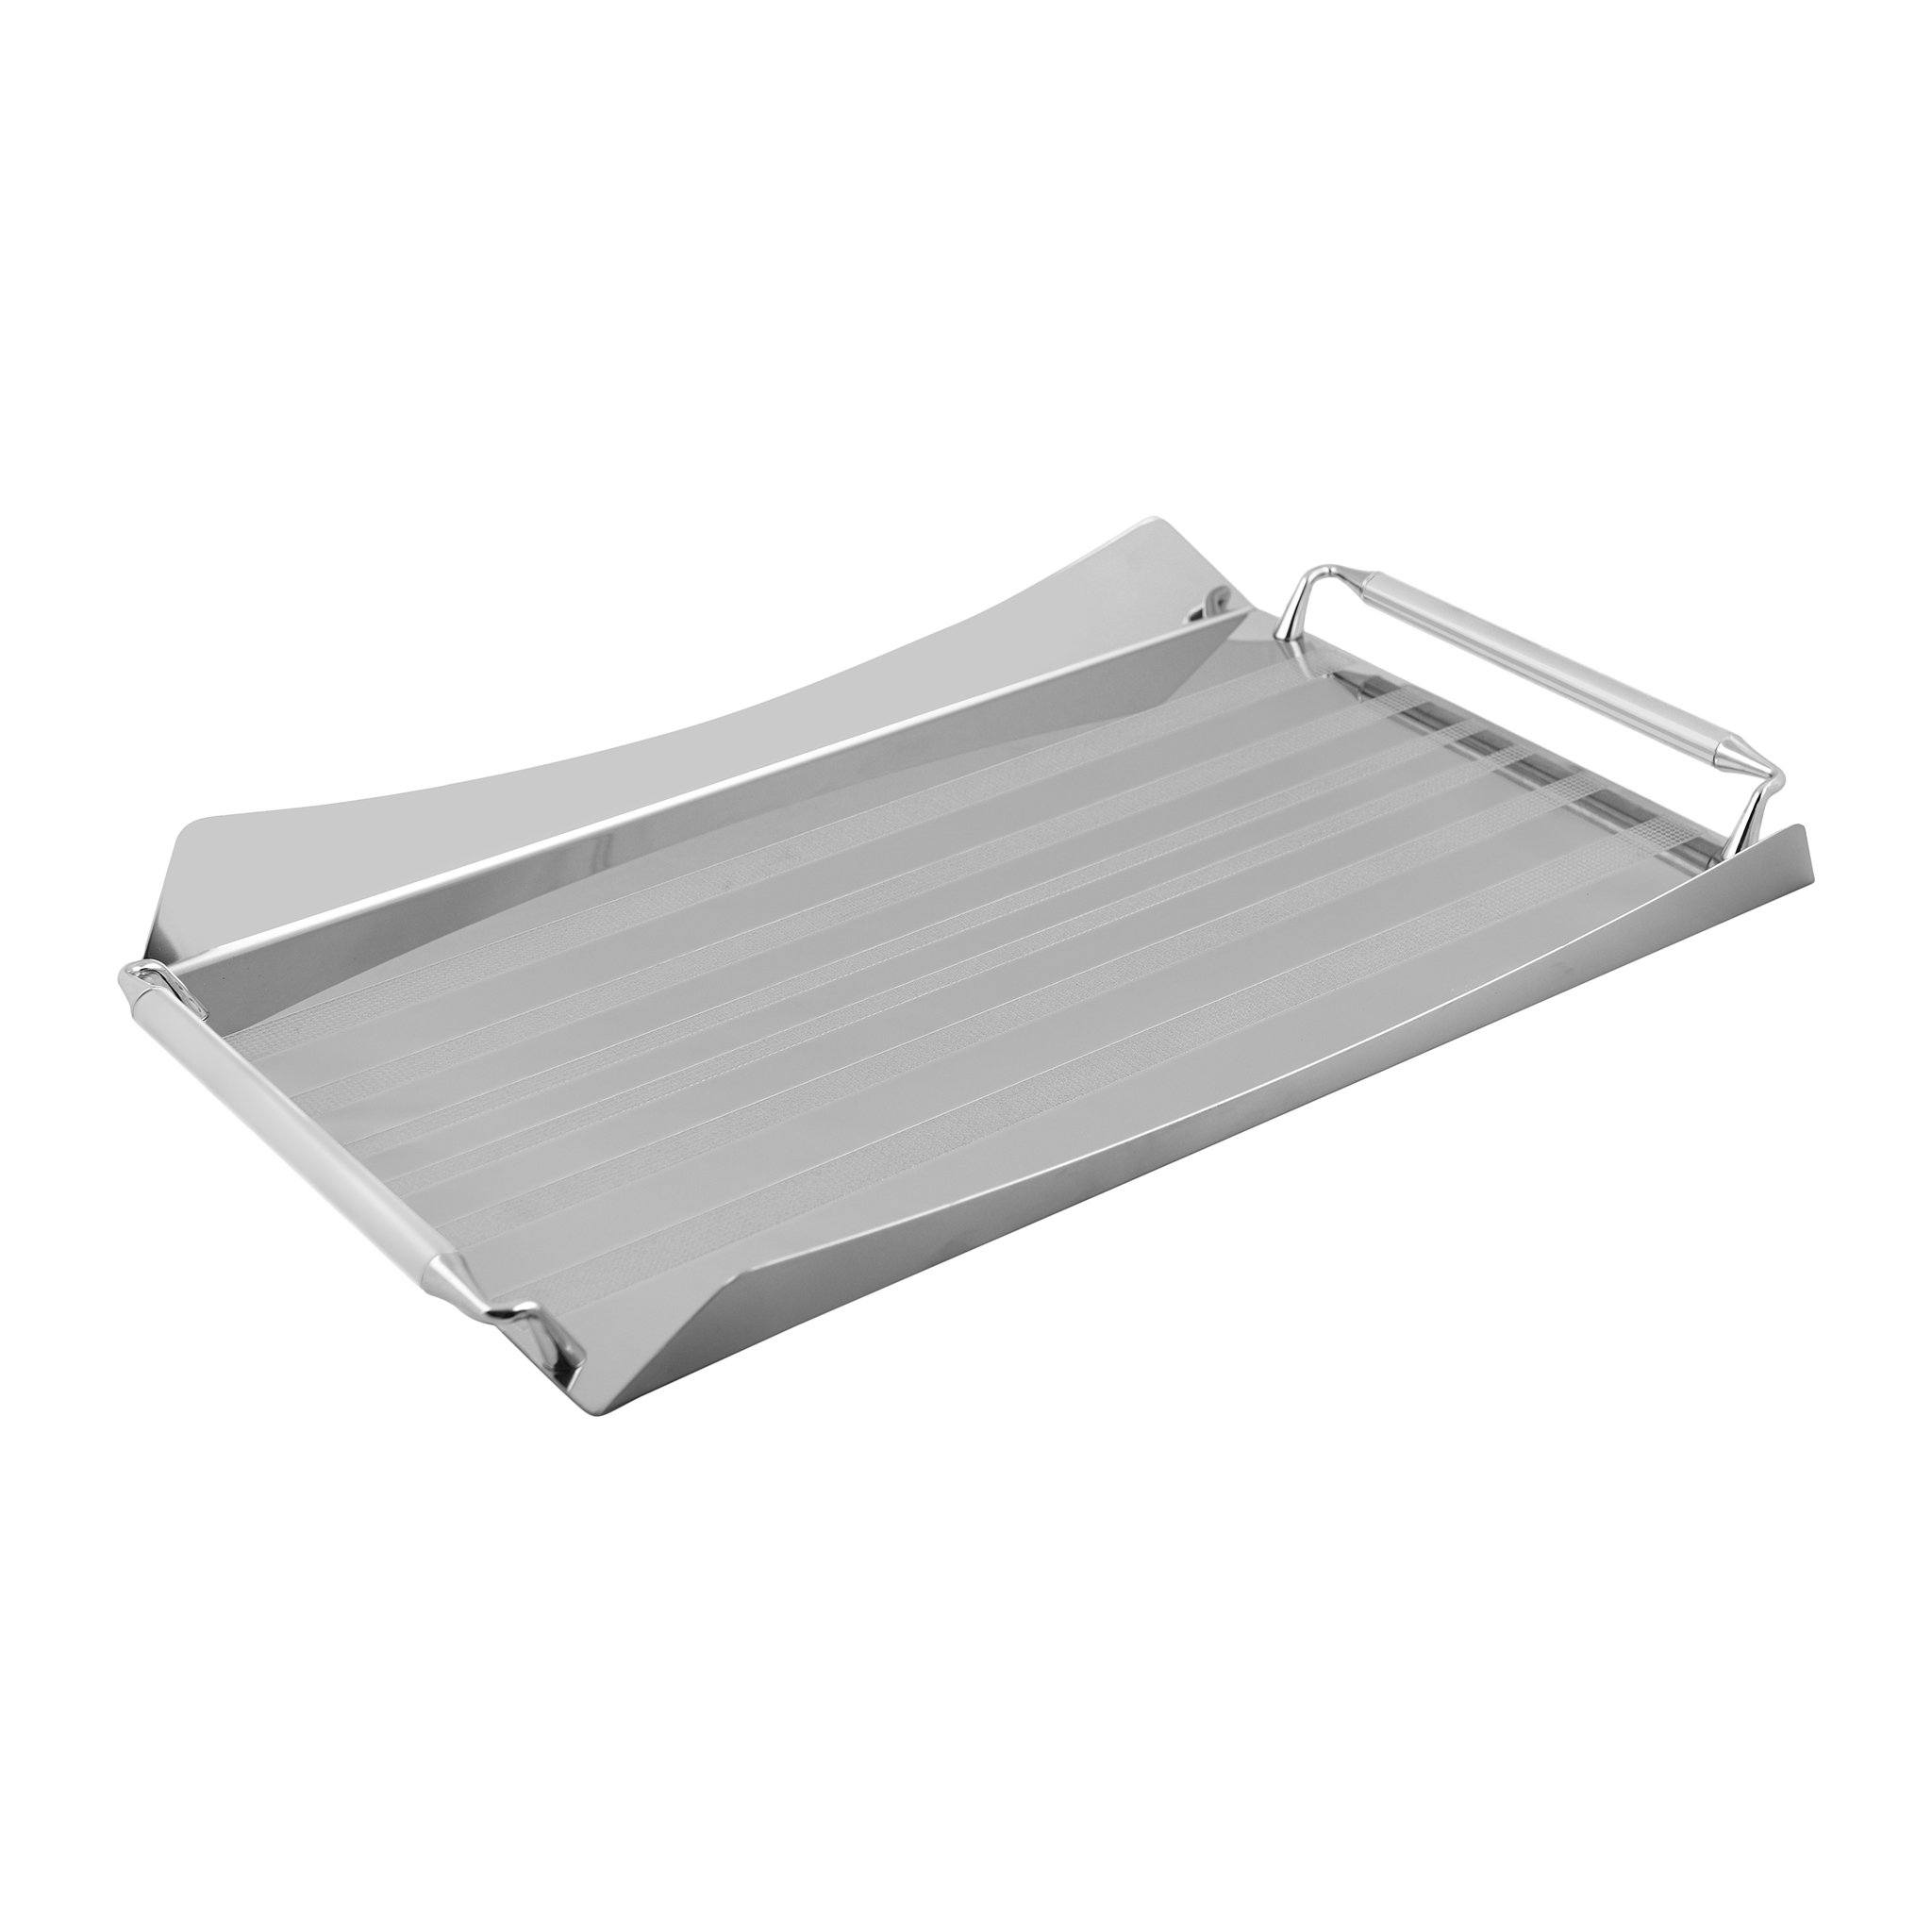 Elegant Gioiel - Rectangular Tray with Handles - Stainless Steel 18/10 - 50x34cm - 75000262